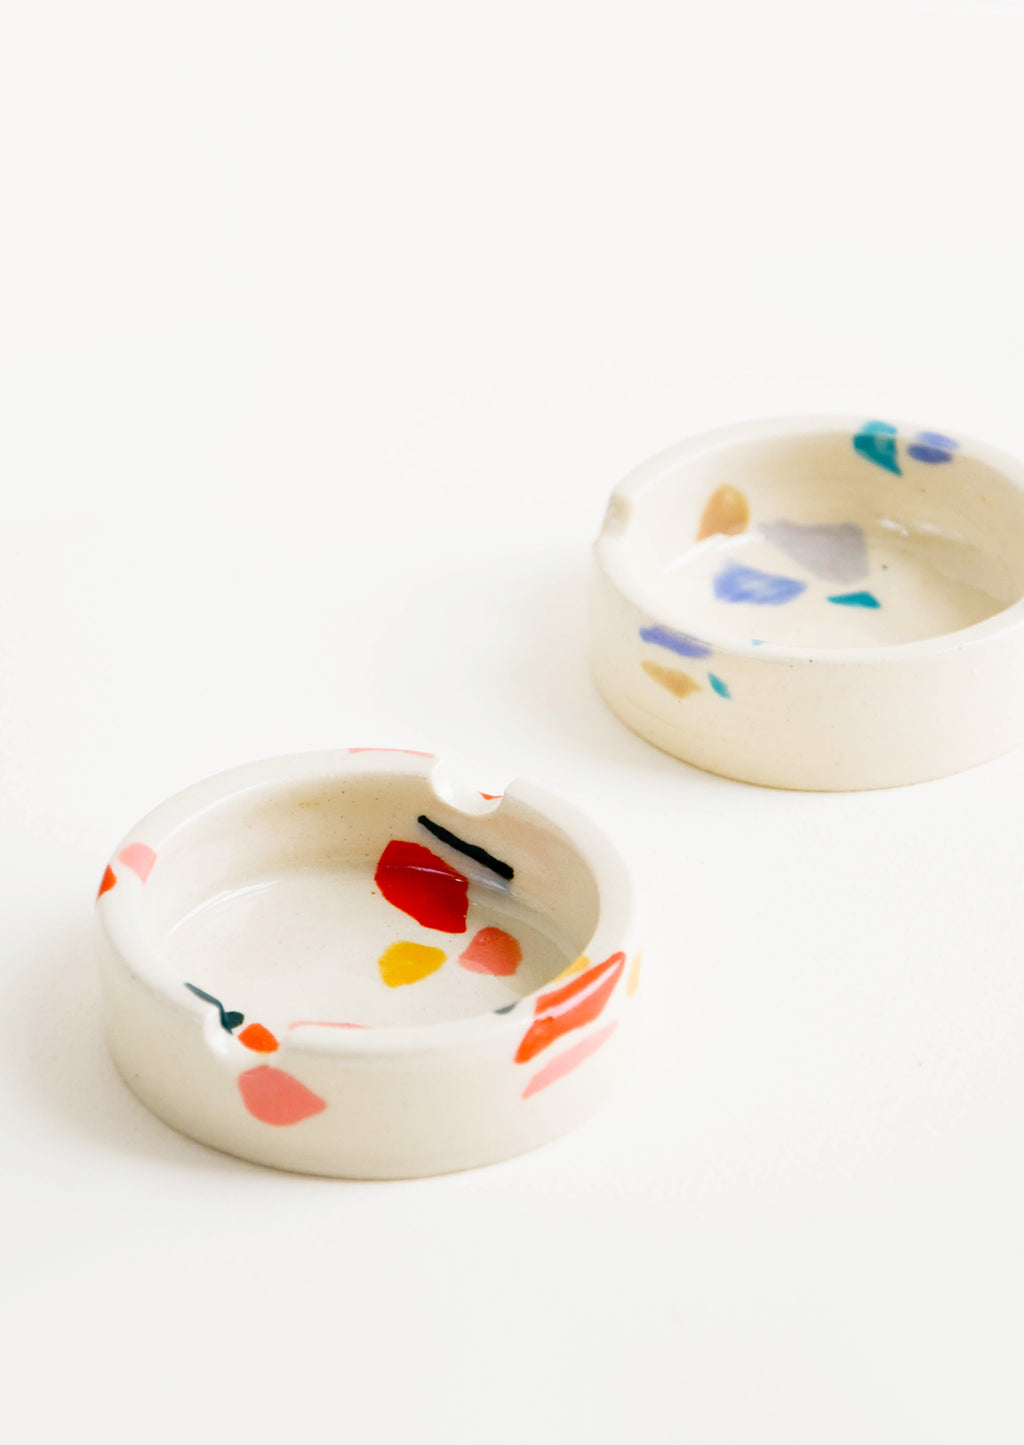 2: Ceramic ashtray with allover hand painted terrazzo pattern in a variety of colors